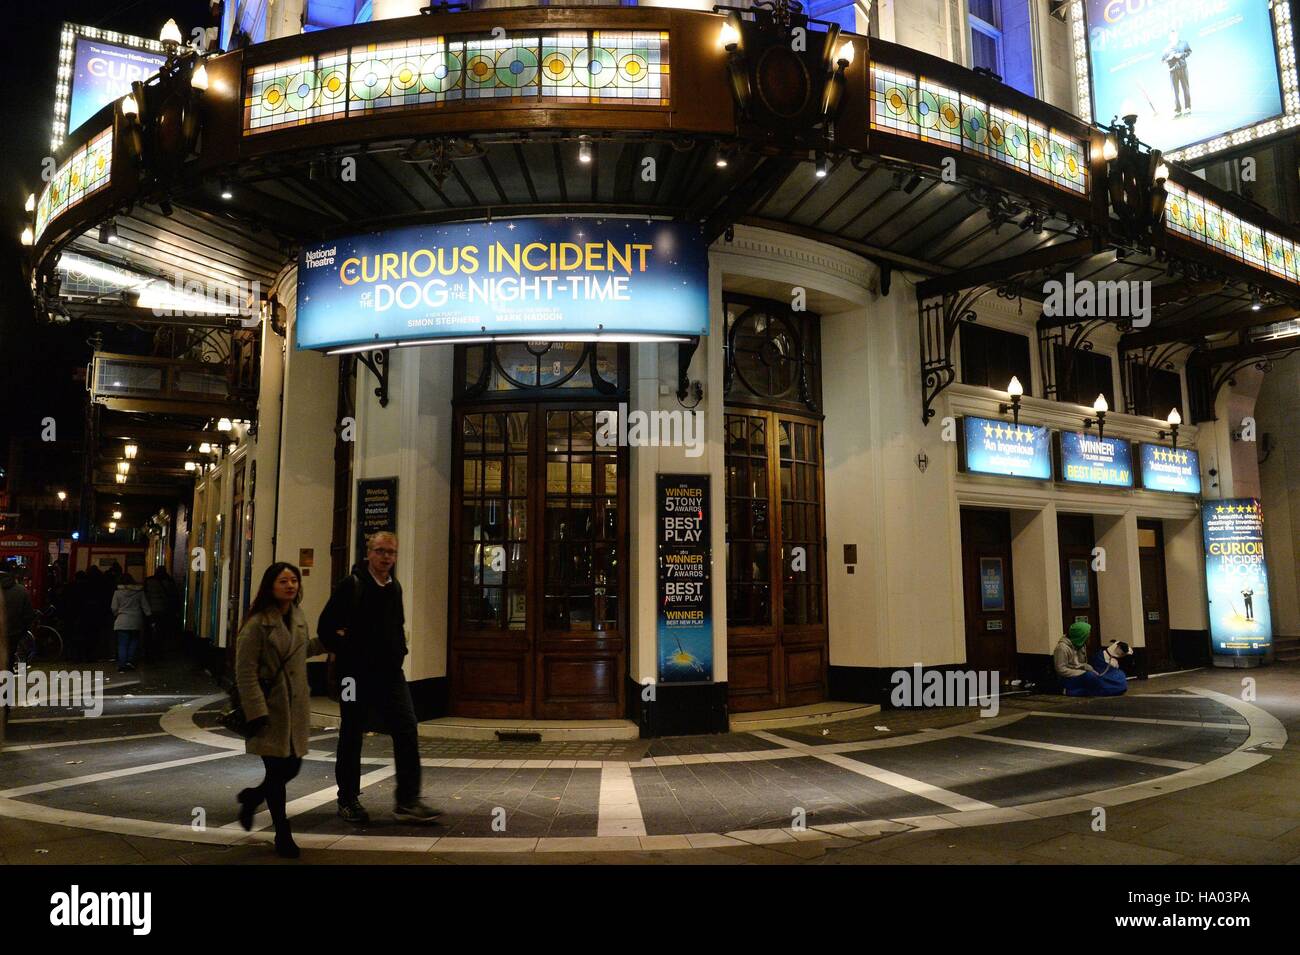 The performance of The Curious Incident Of The Dog In The Night-time is cancelled at The Gielgud Theatre on Shaftesbury Avenue, as a power cut has plunged parts of central London into darkness. Stock Photo